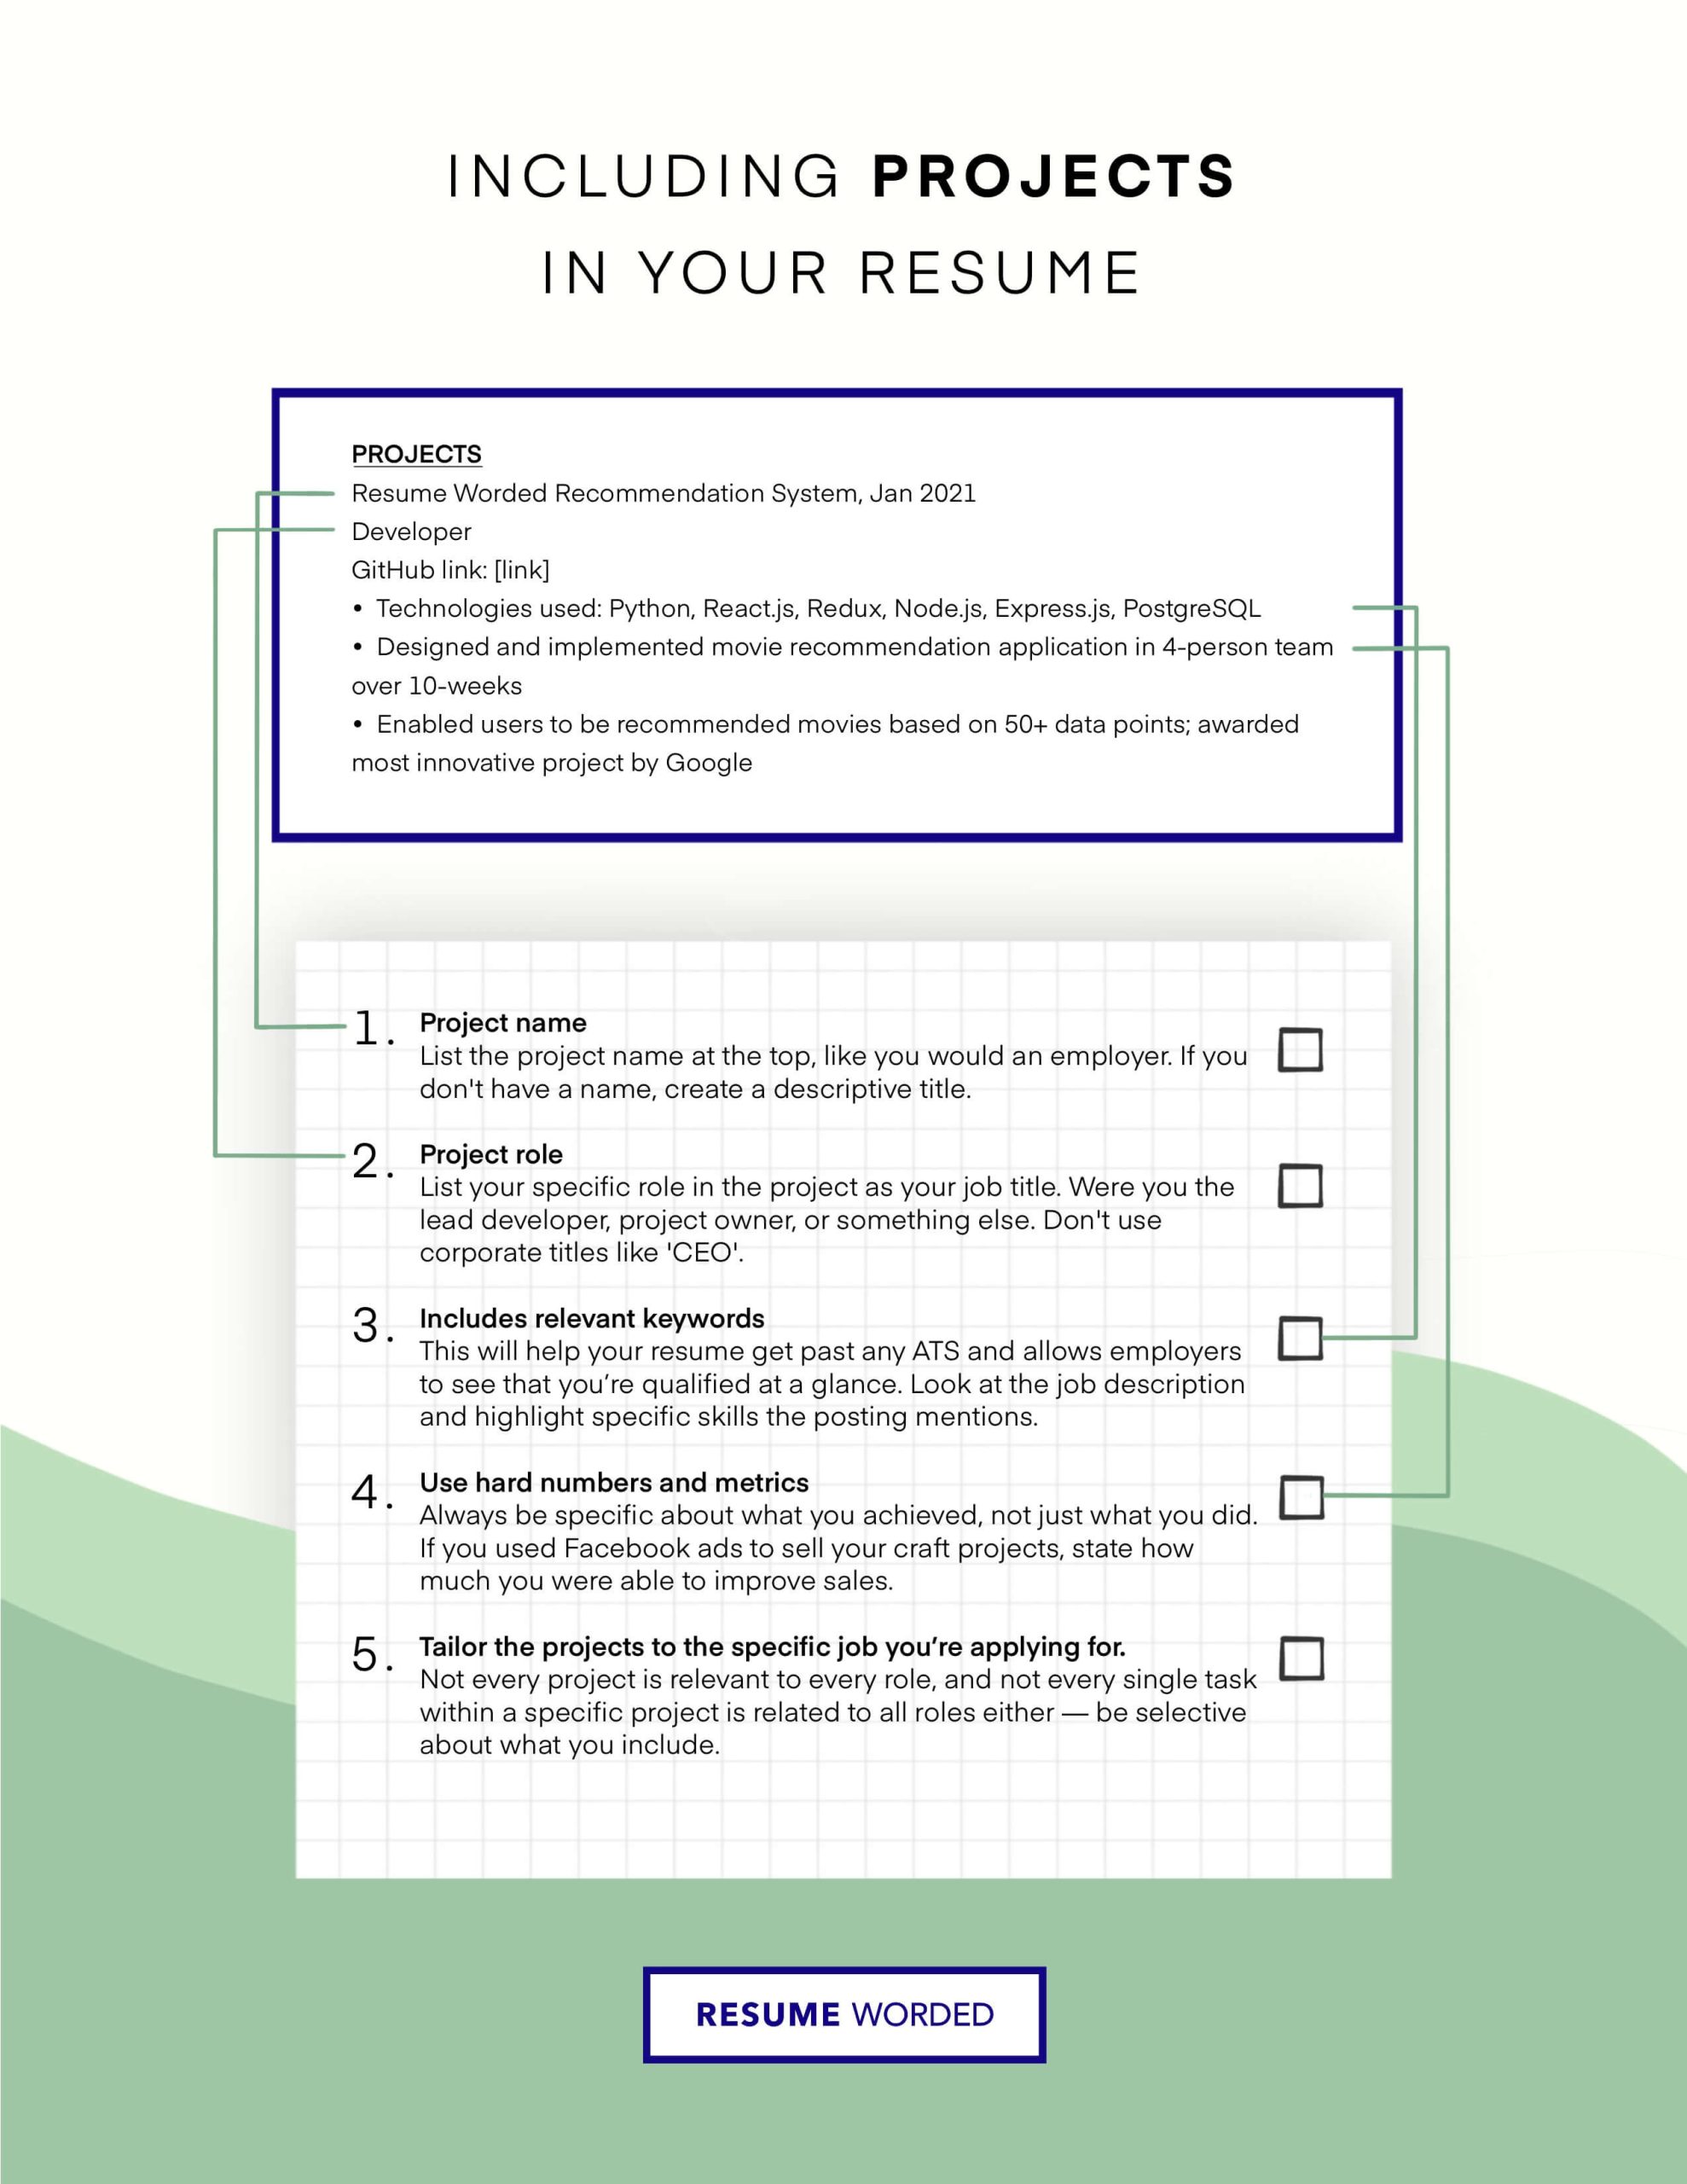 Bulk Mailings Task On Sample Resume How to List Projects On A Resume